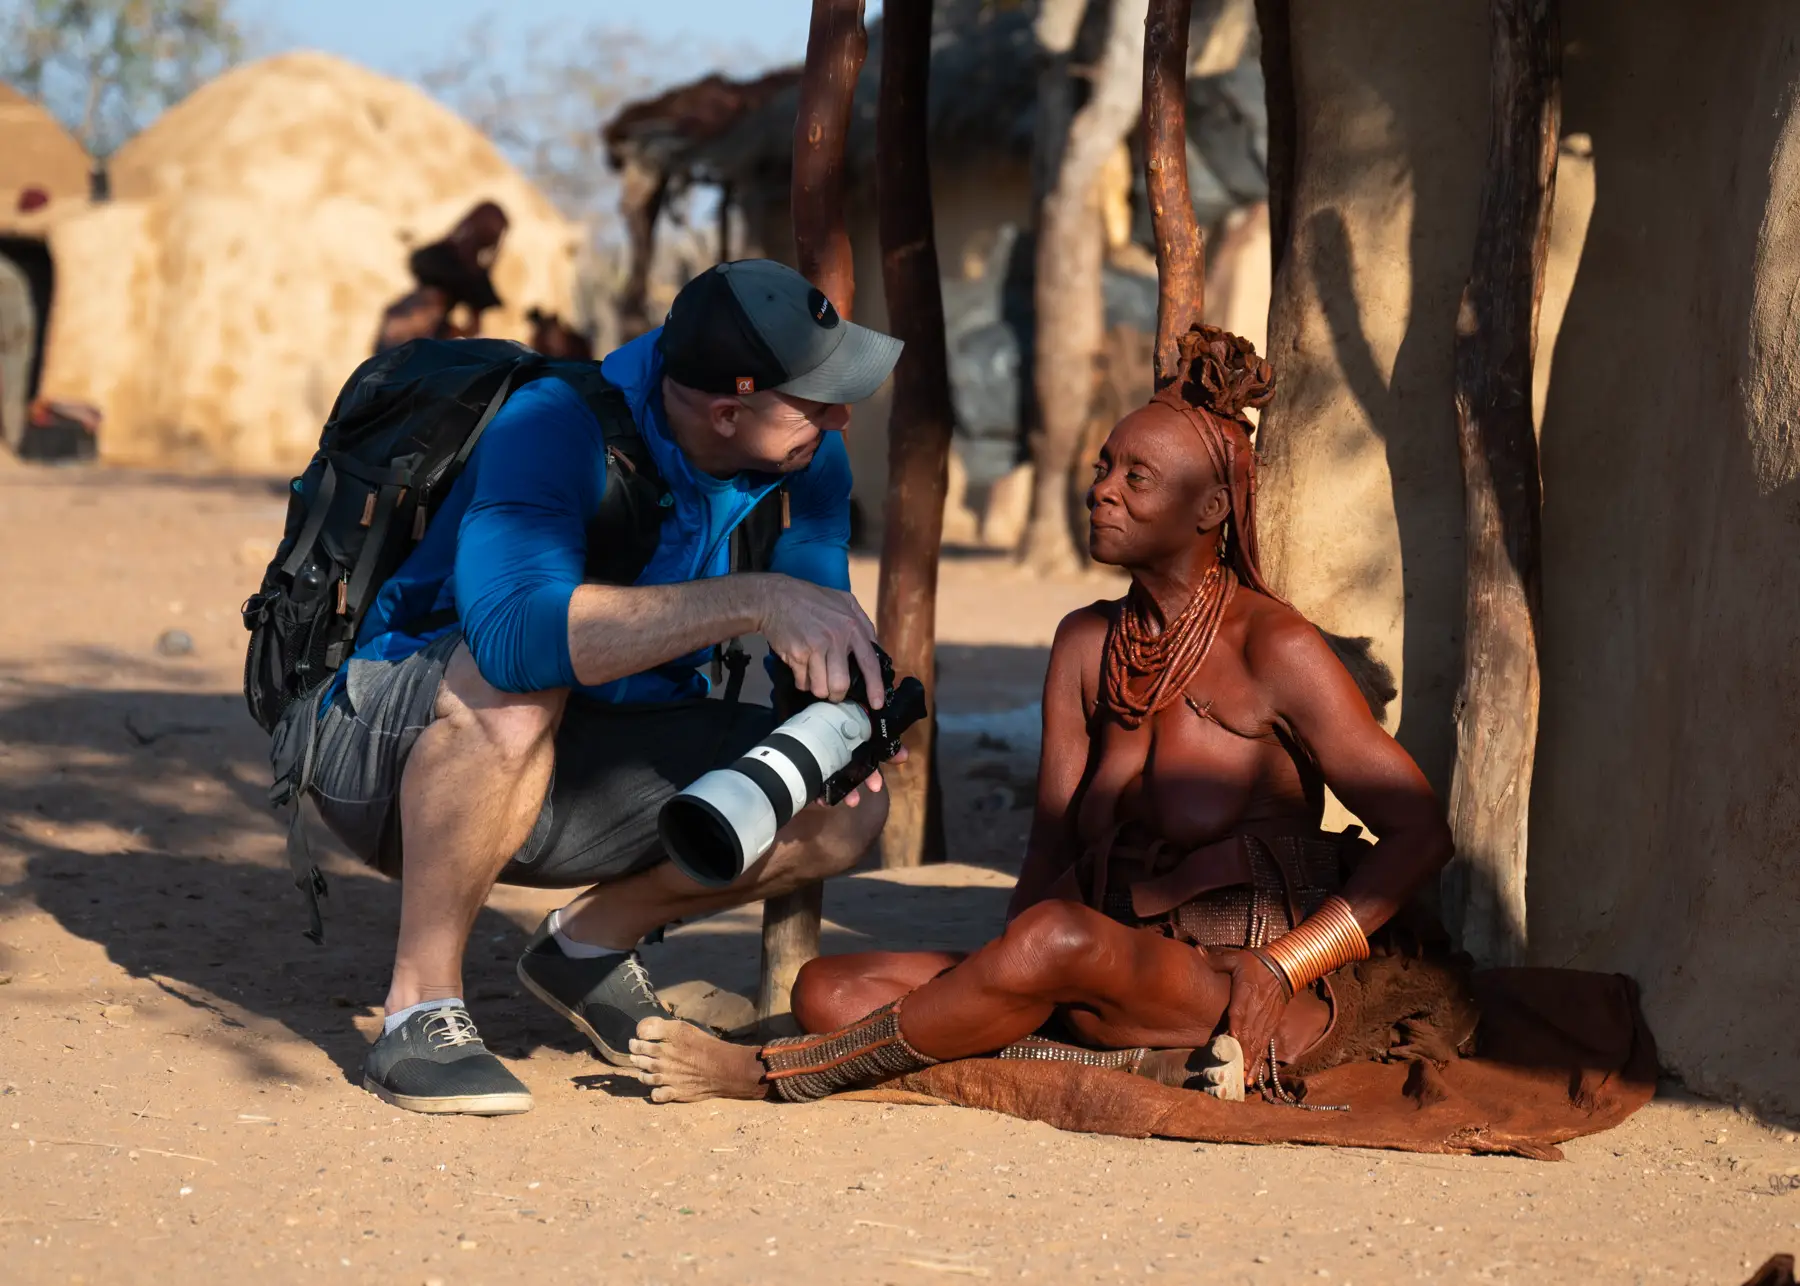 Photographing the Himba people